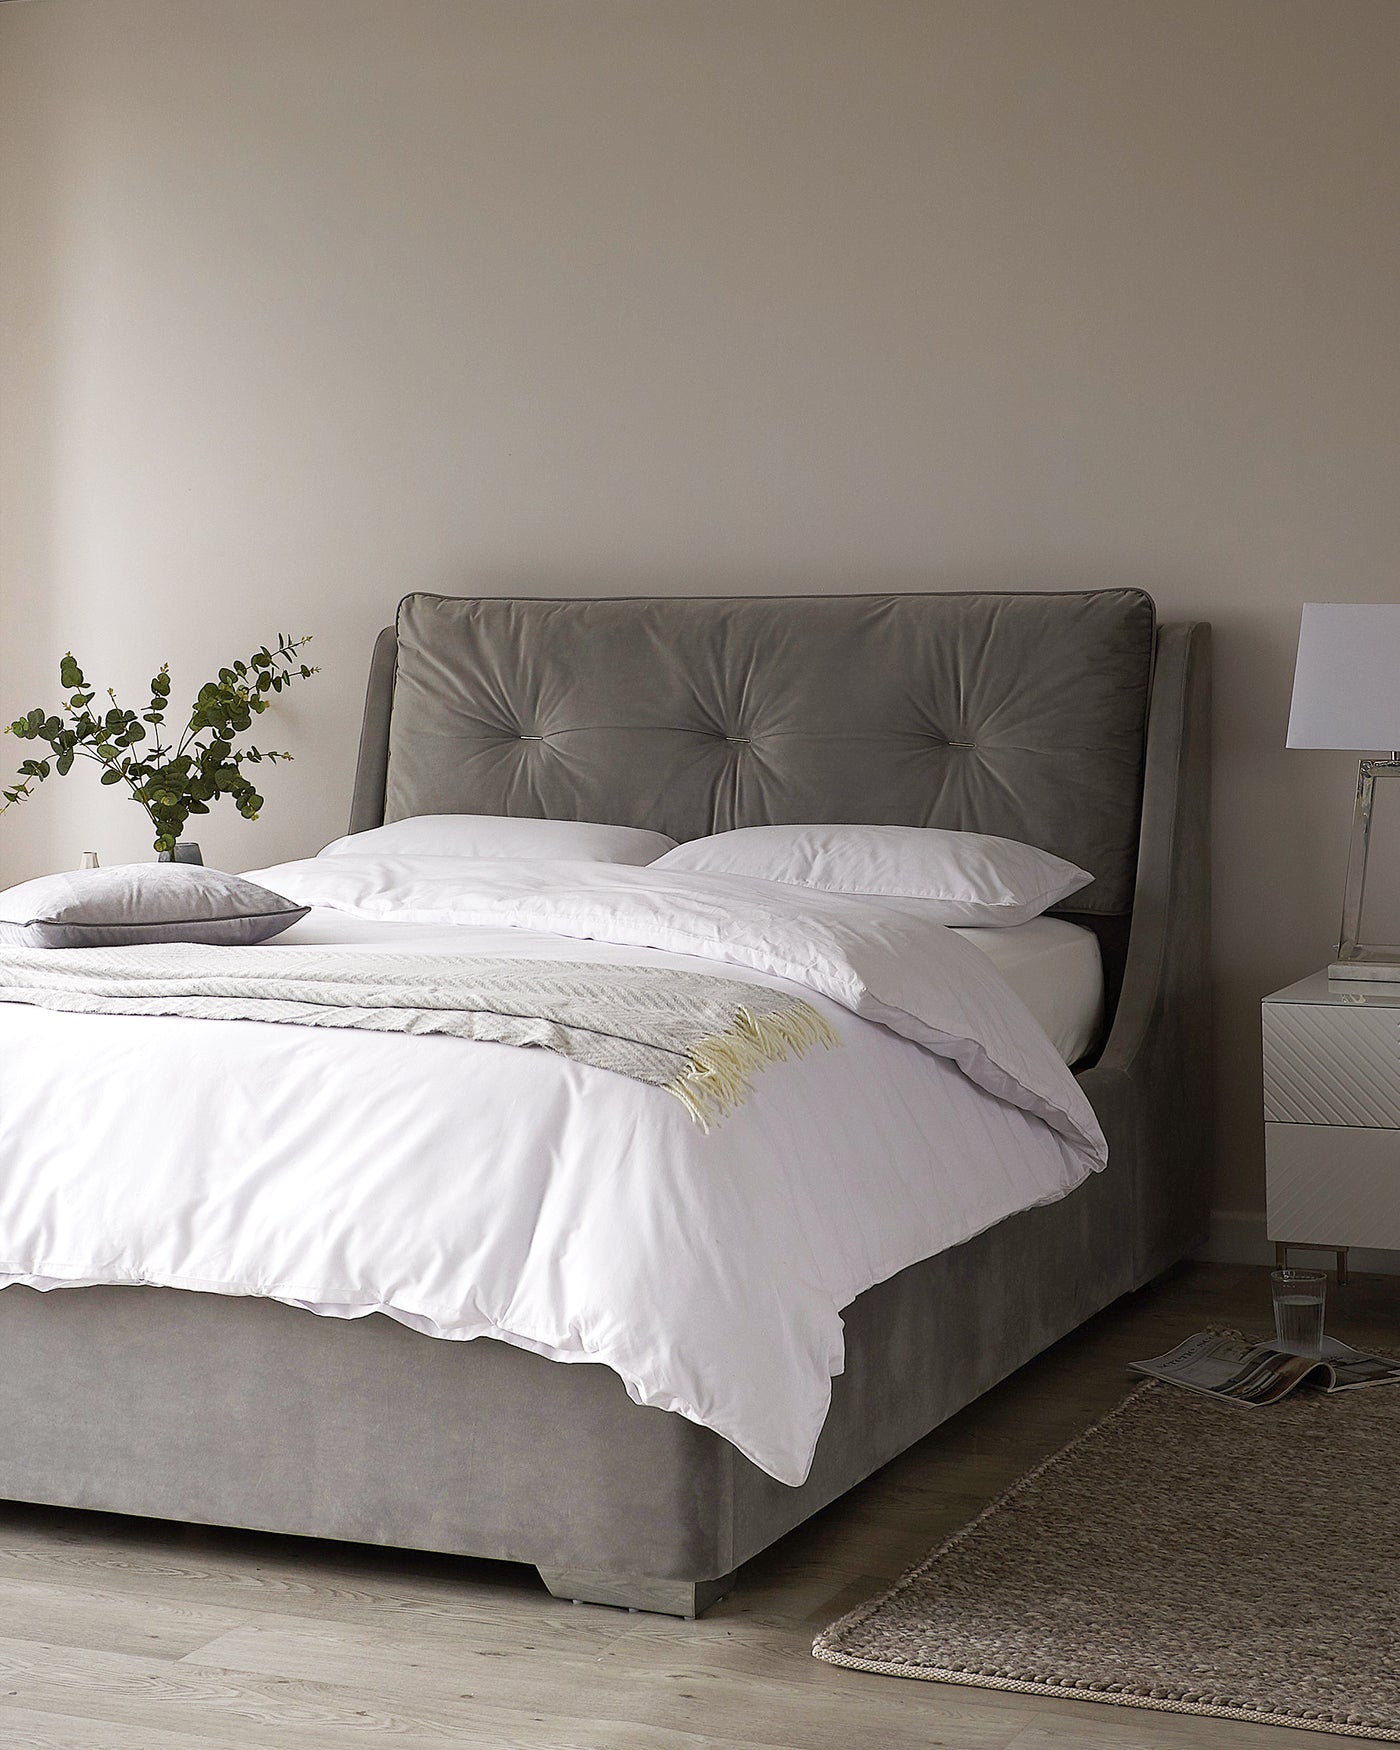 Elegant bedroom featuring a large, grey upholstered bed with a tufted headboard, white bedding, and a decorative throw pillow. A sleek white bedside table with a modern lamp is positioned to the right of the bed, while a textured grey area rug lies partially underneath. A green potted plant adds a touch of nature to the space.